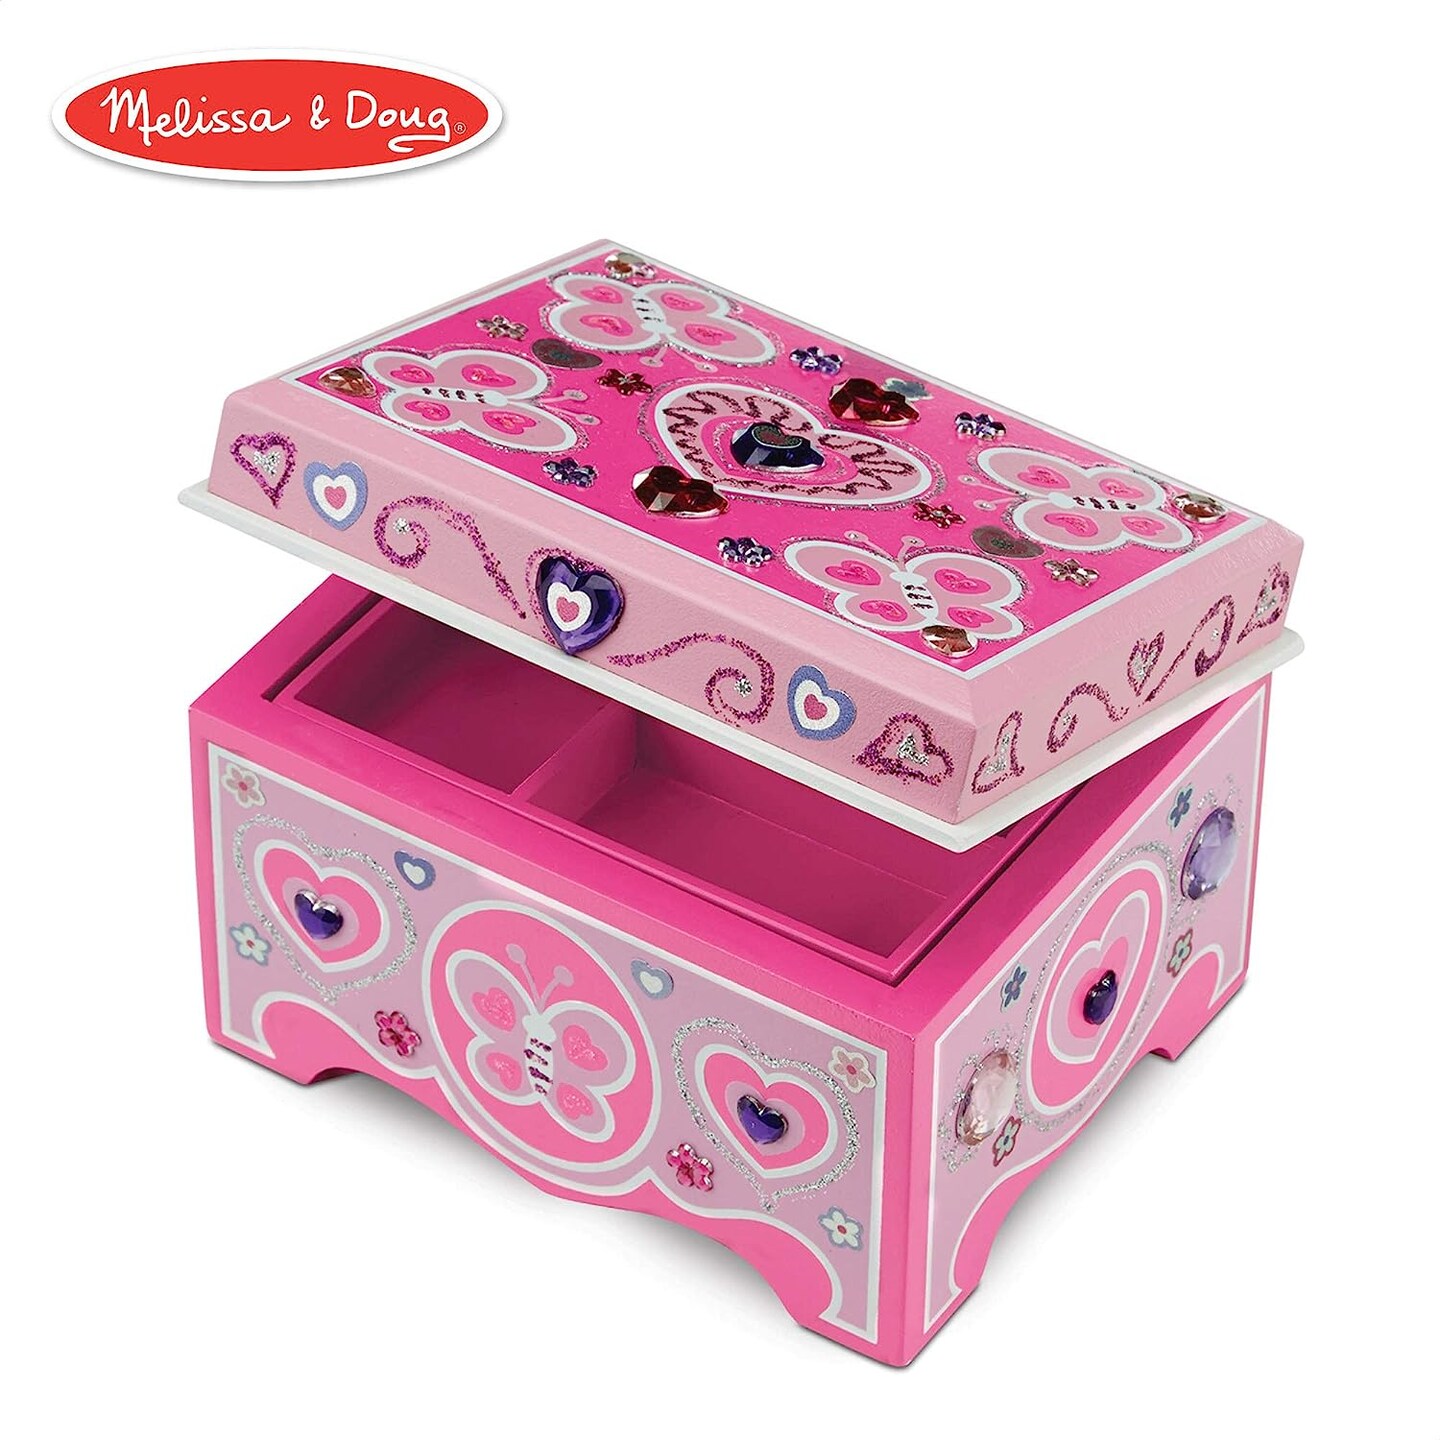 Decorate Your Own Jewelry Box